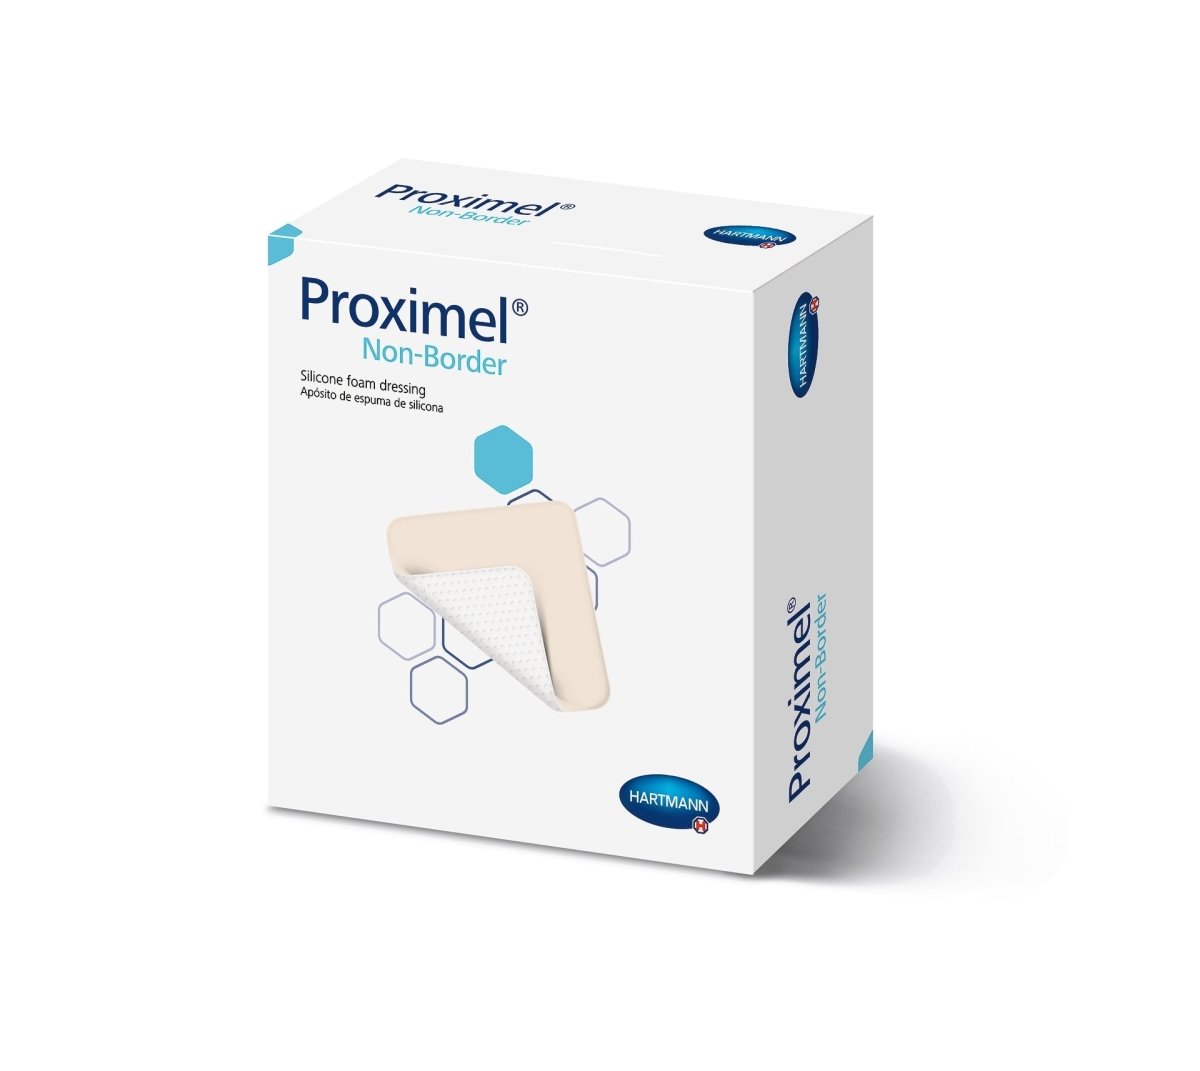 Proximel Nonadhesive without Border Silicone Foam Dressing, 6 x 6 Inch - 1118469_BX - 1